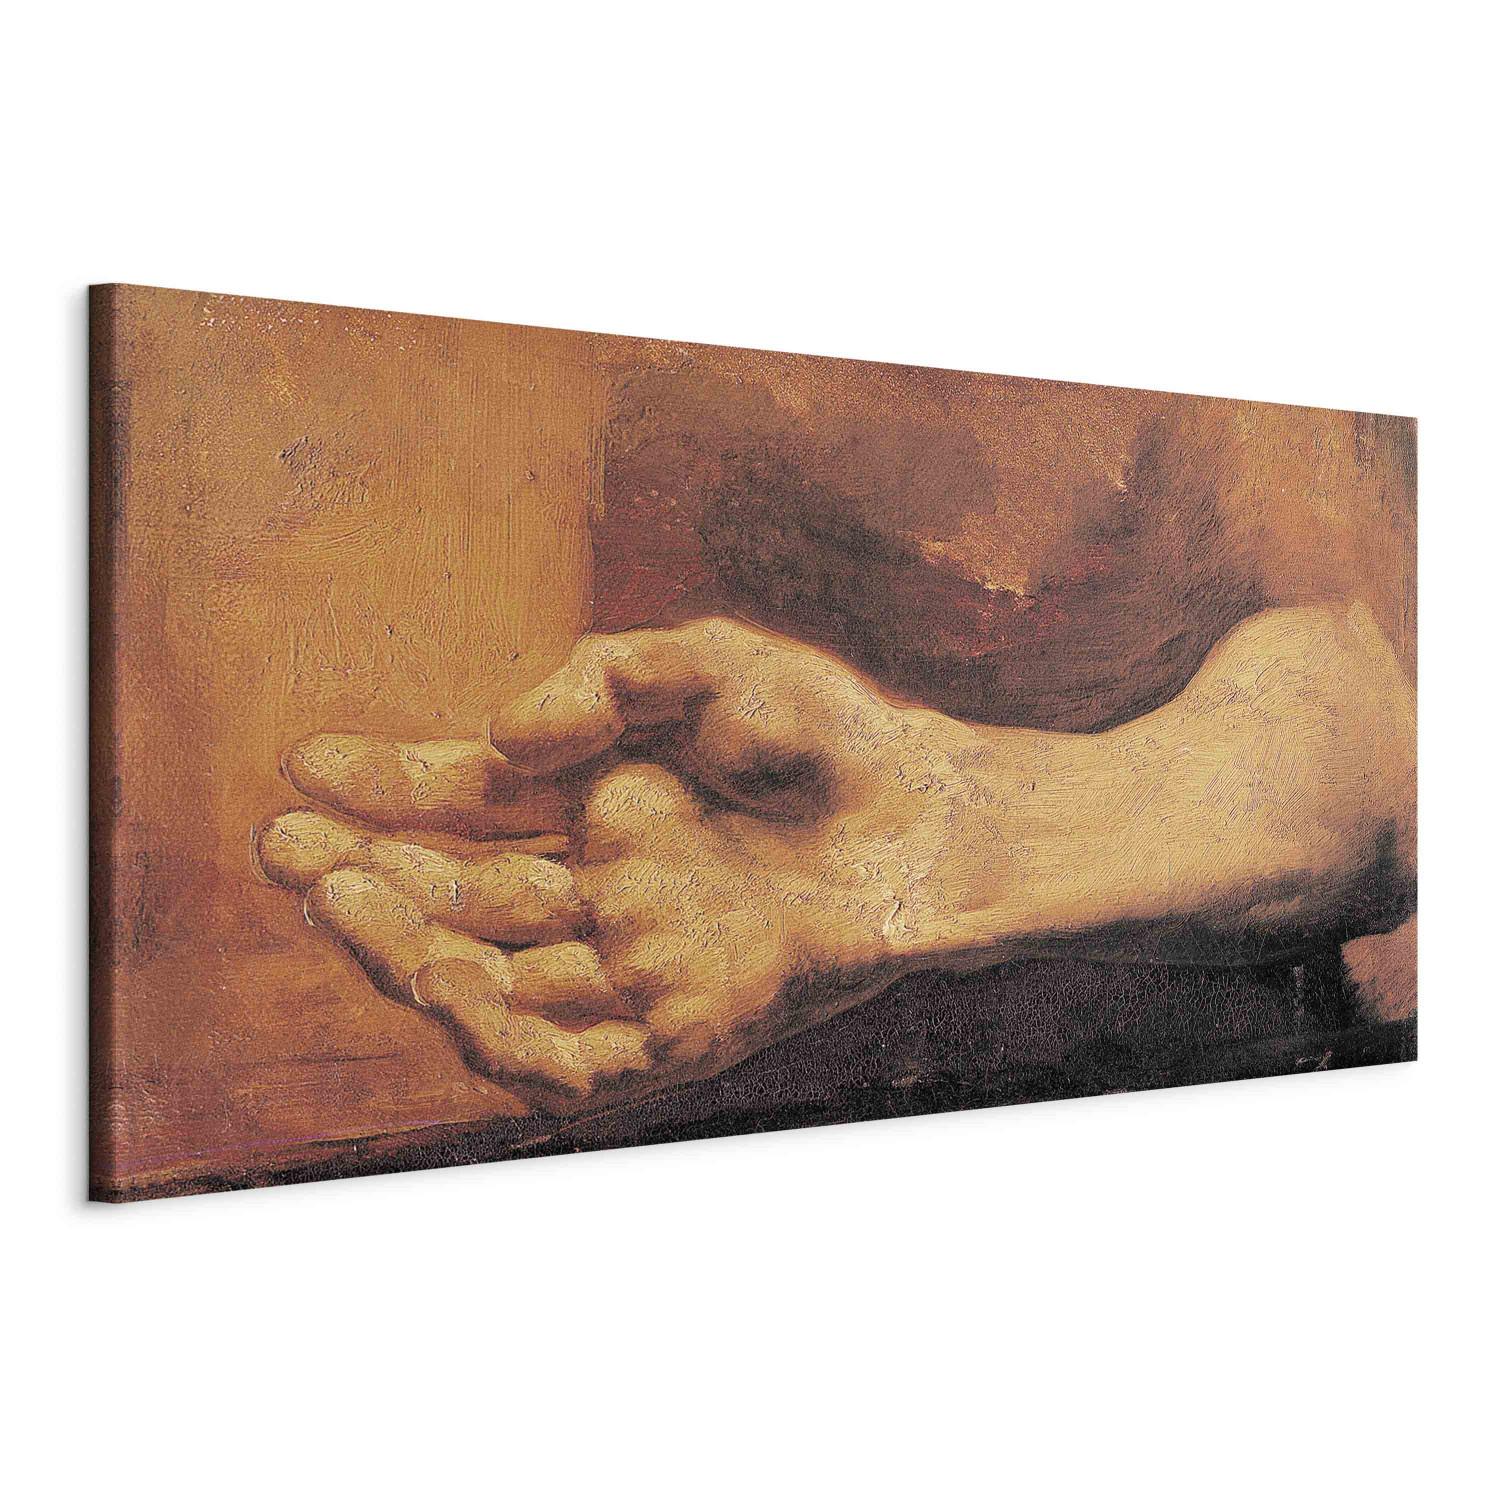 Canvas Study of a Hand and Arm